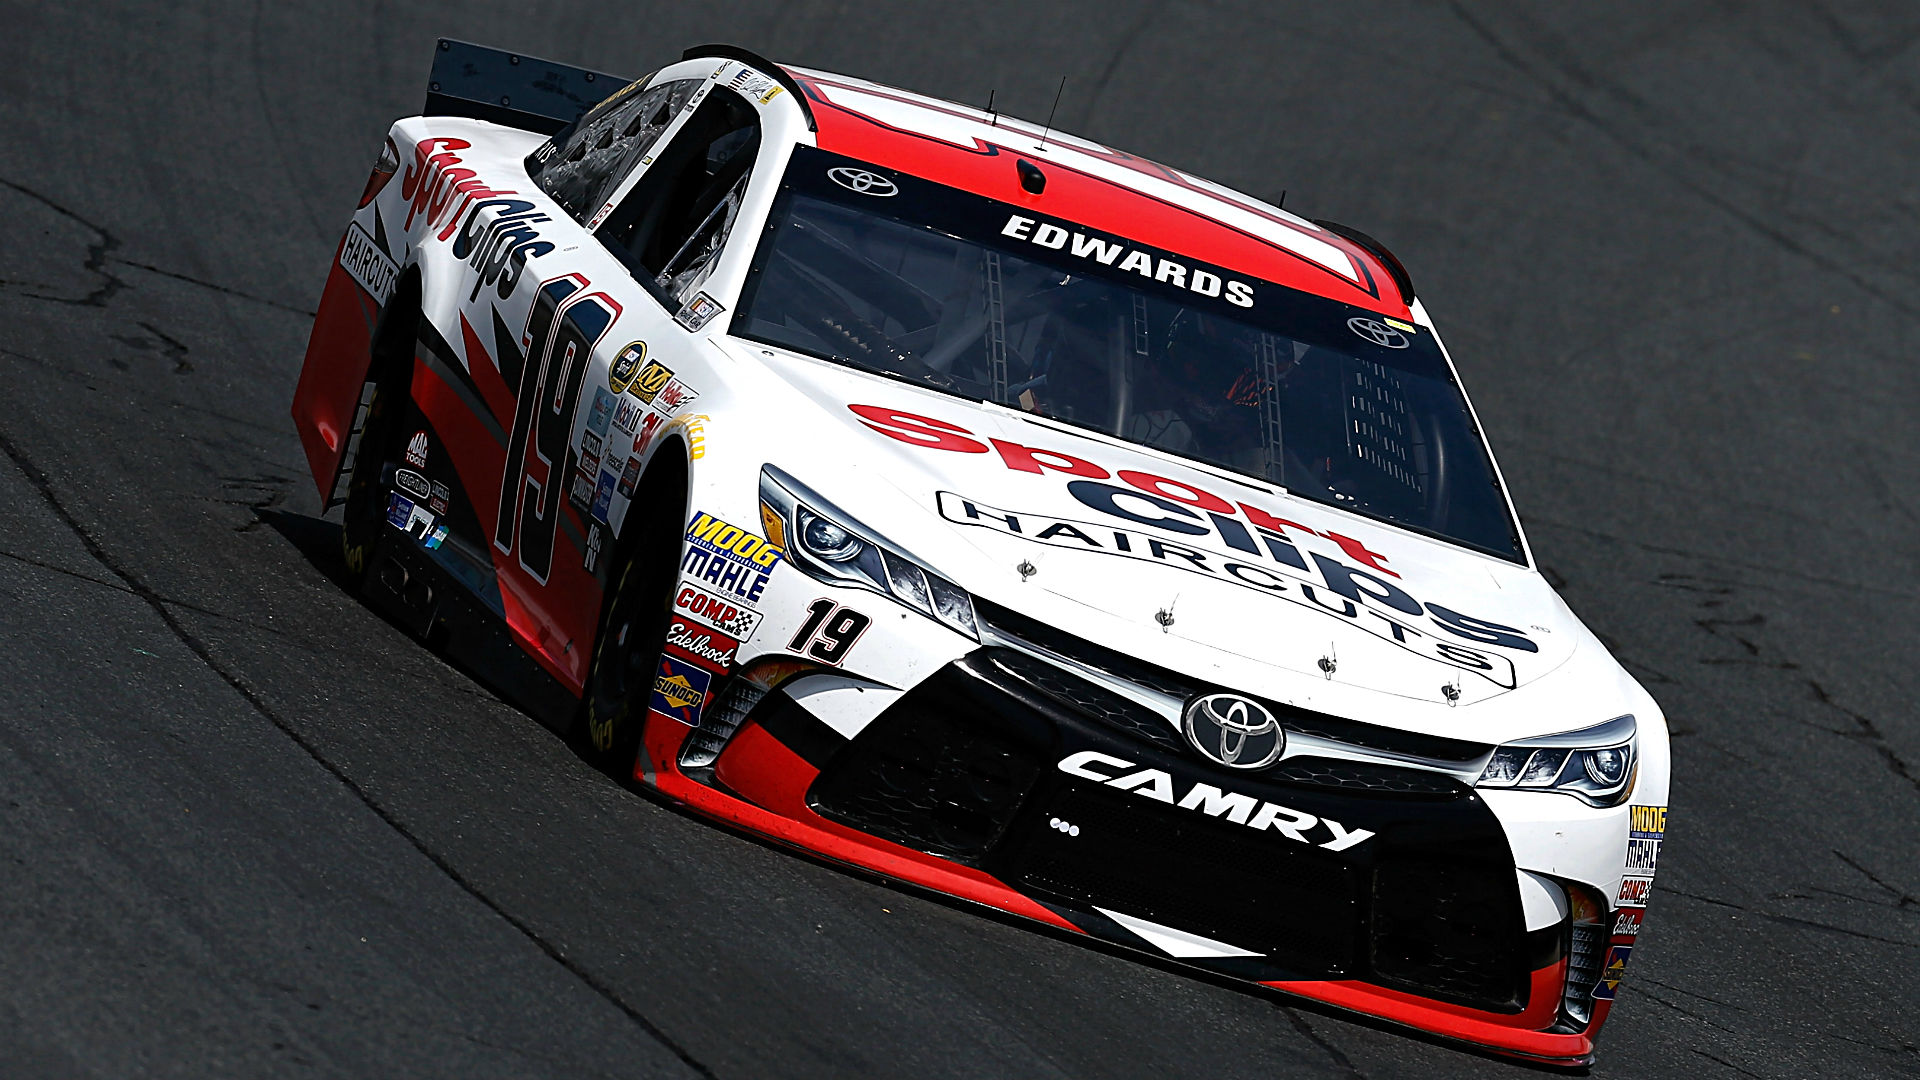 Carl Edwards On Pole For Nascar At New Hampshire